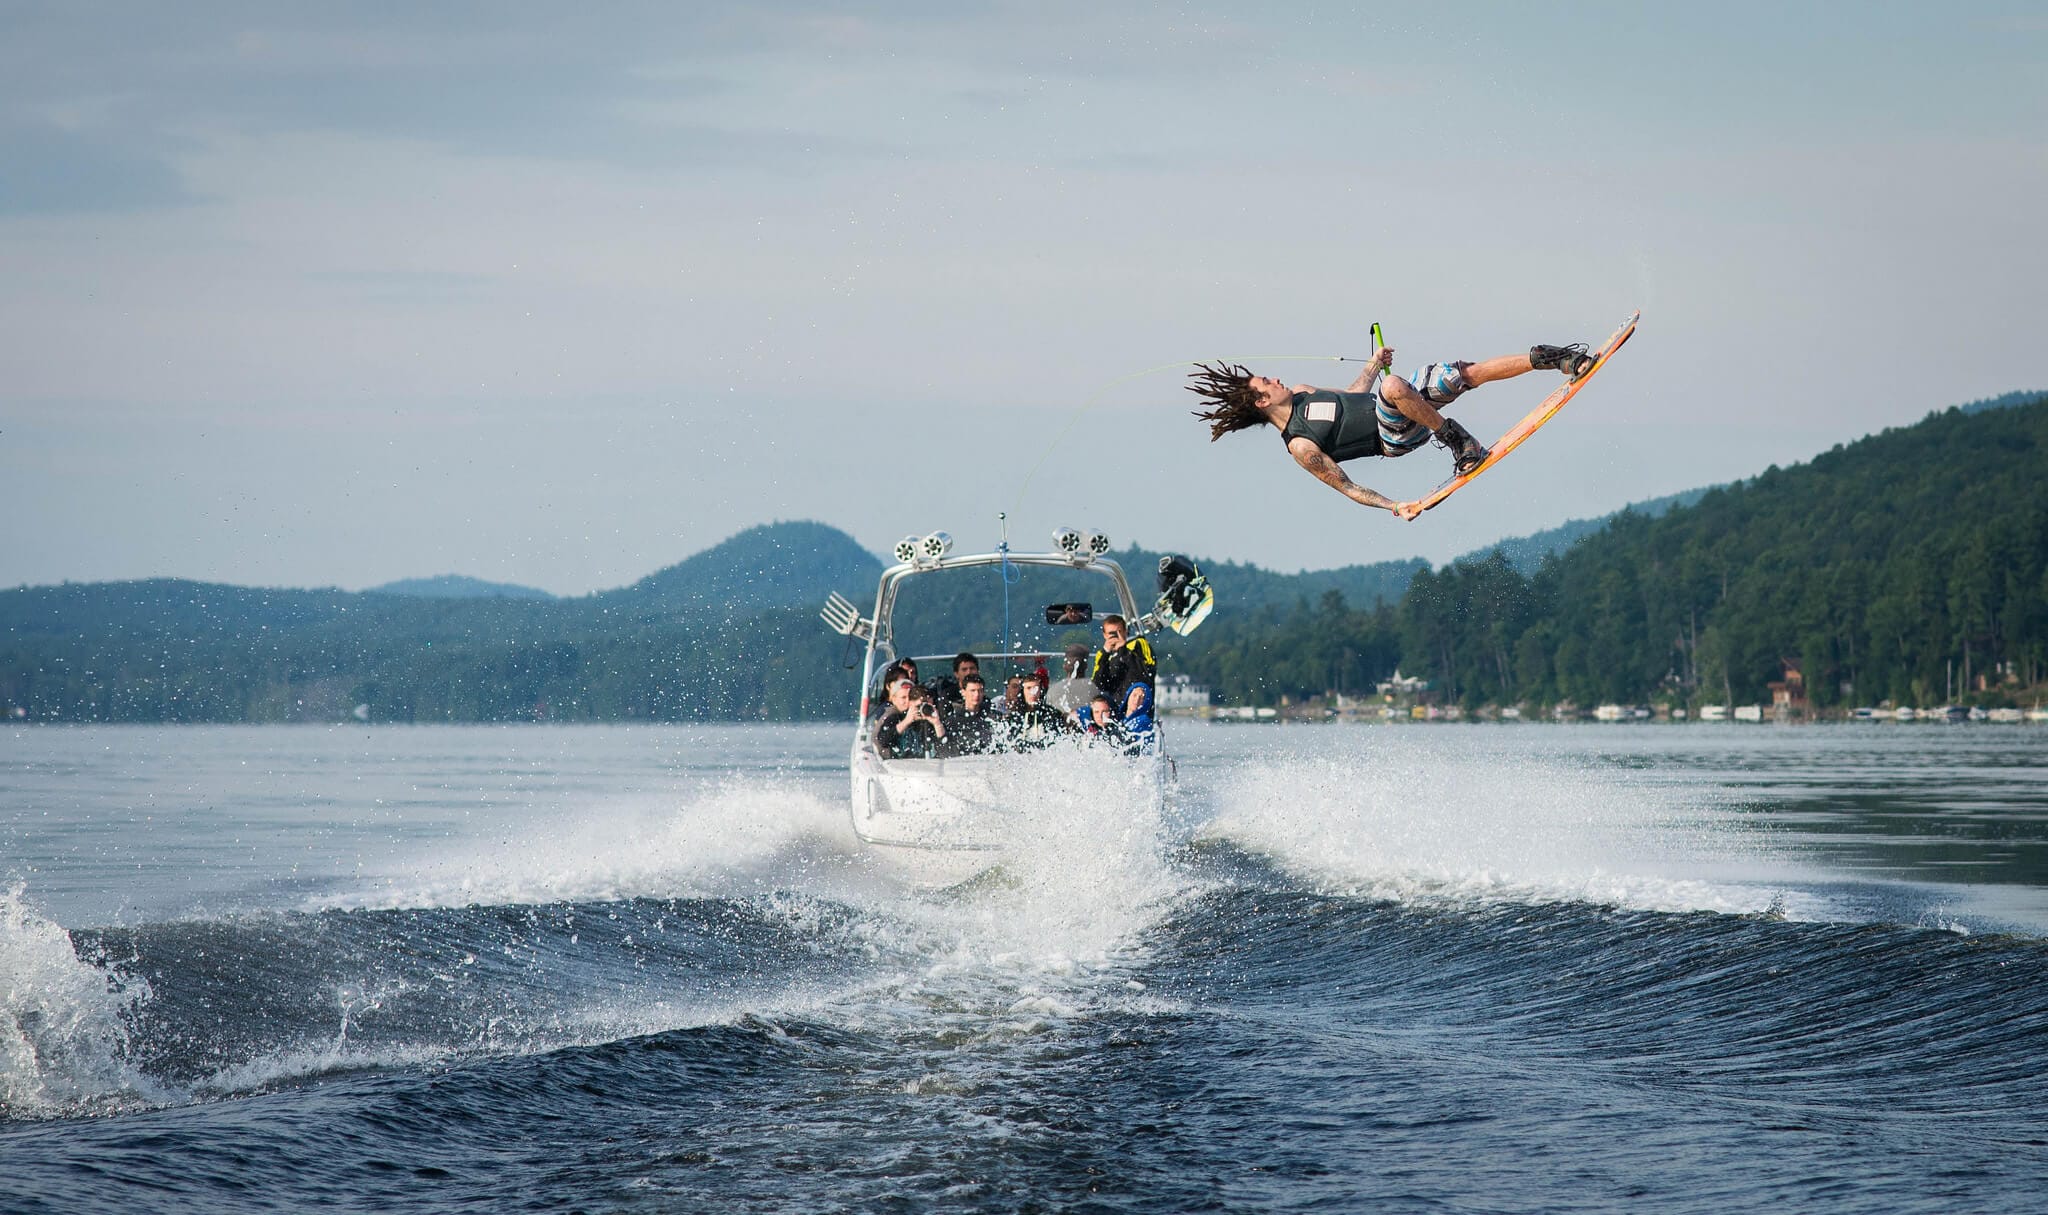 person wake boarding and in mid air.